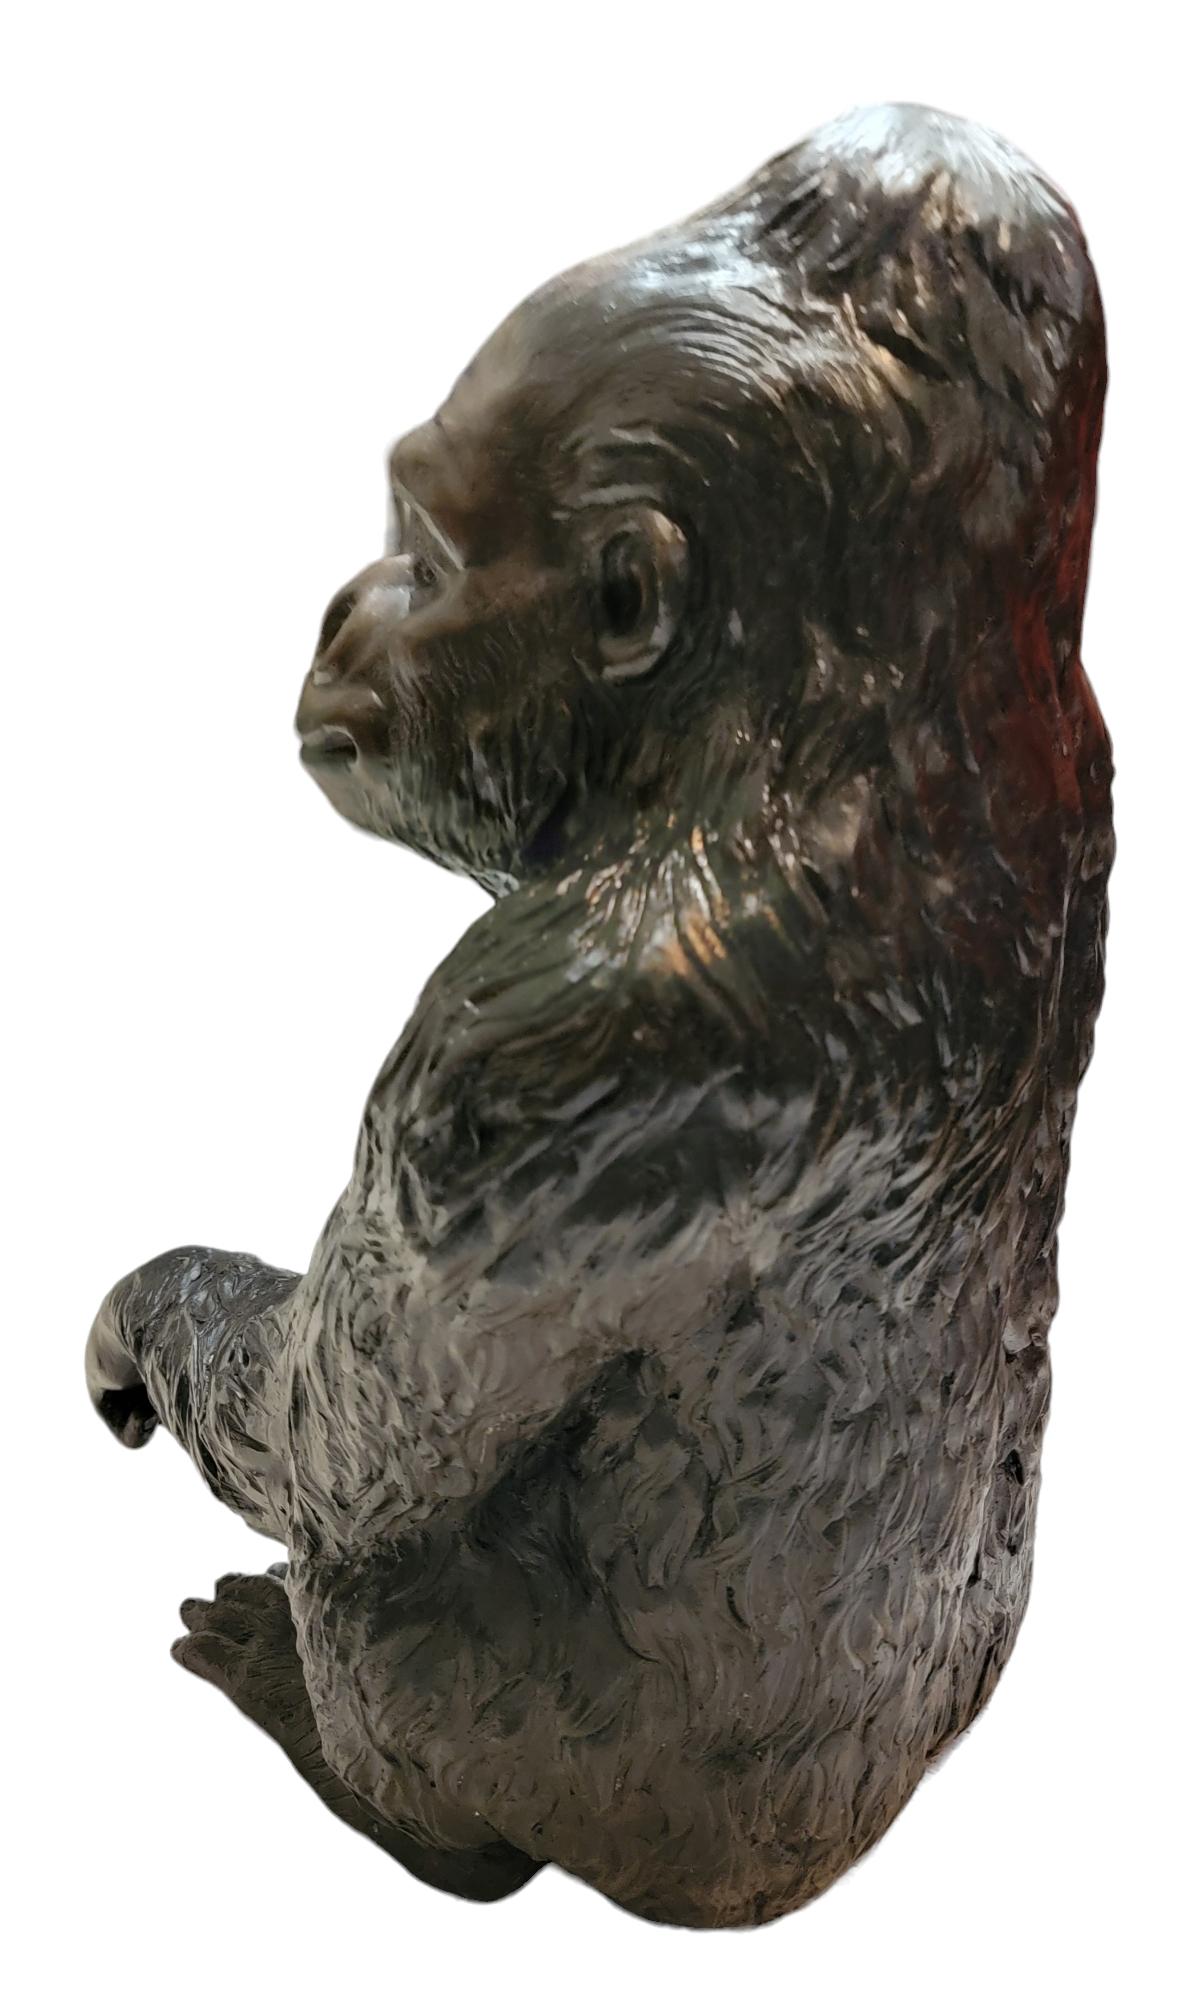 Vintage Sitting Bronze Gorilla. Wonderful patina. Great proportional shapes.  measures approx - 24h x 13w x 12 deep